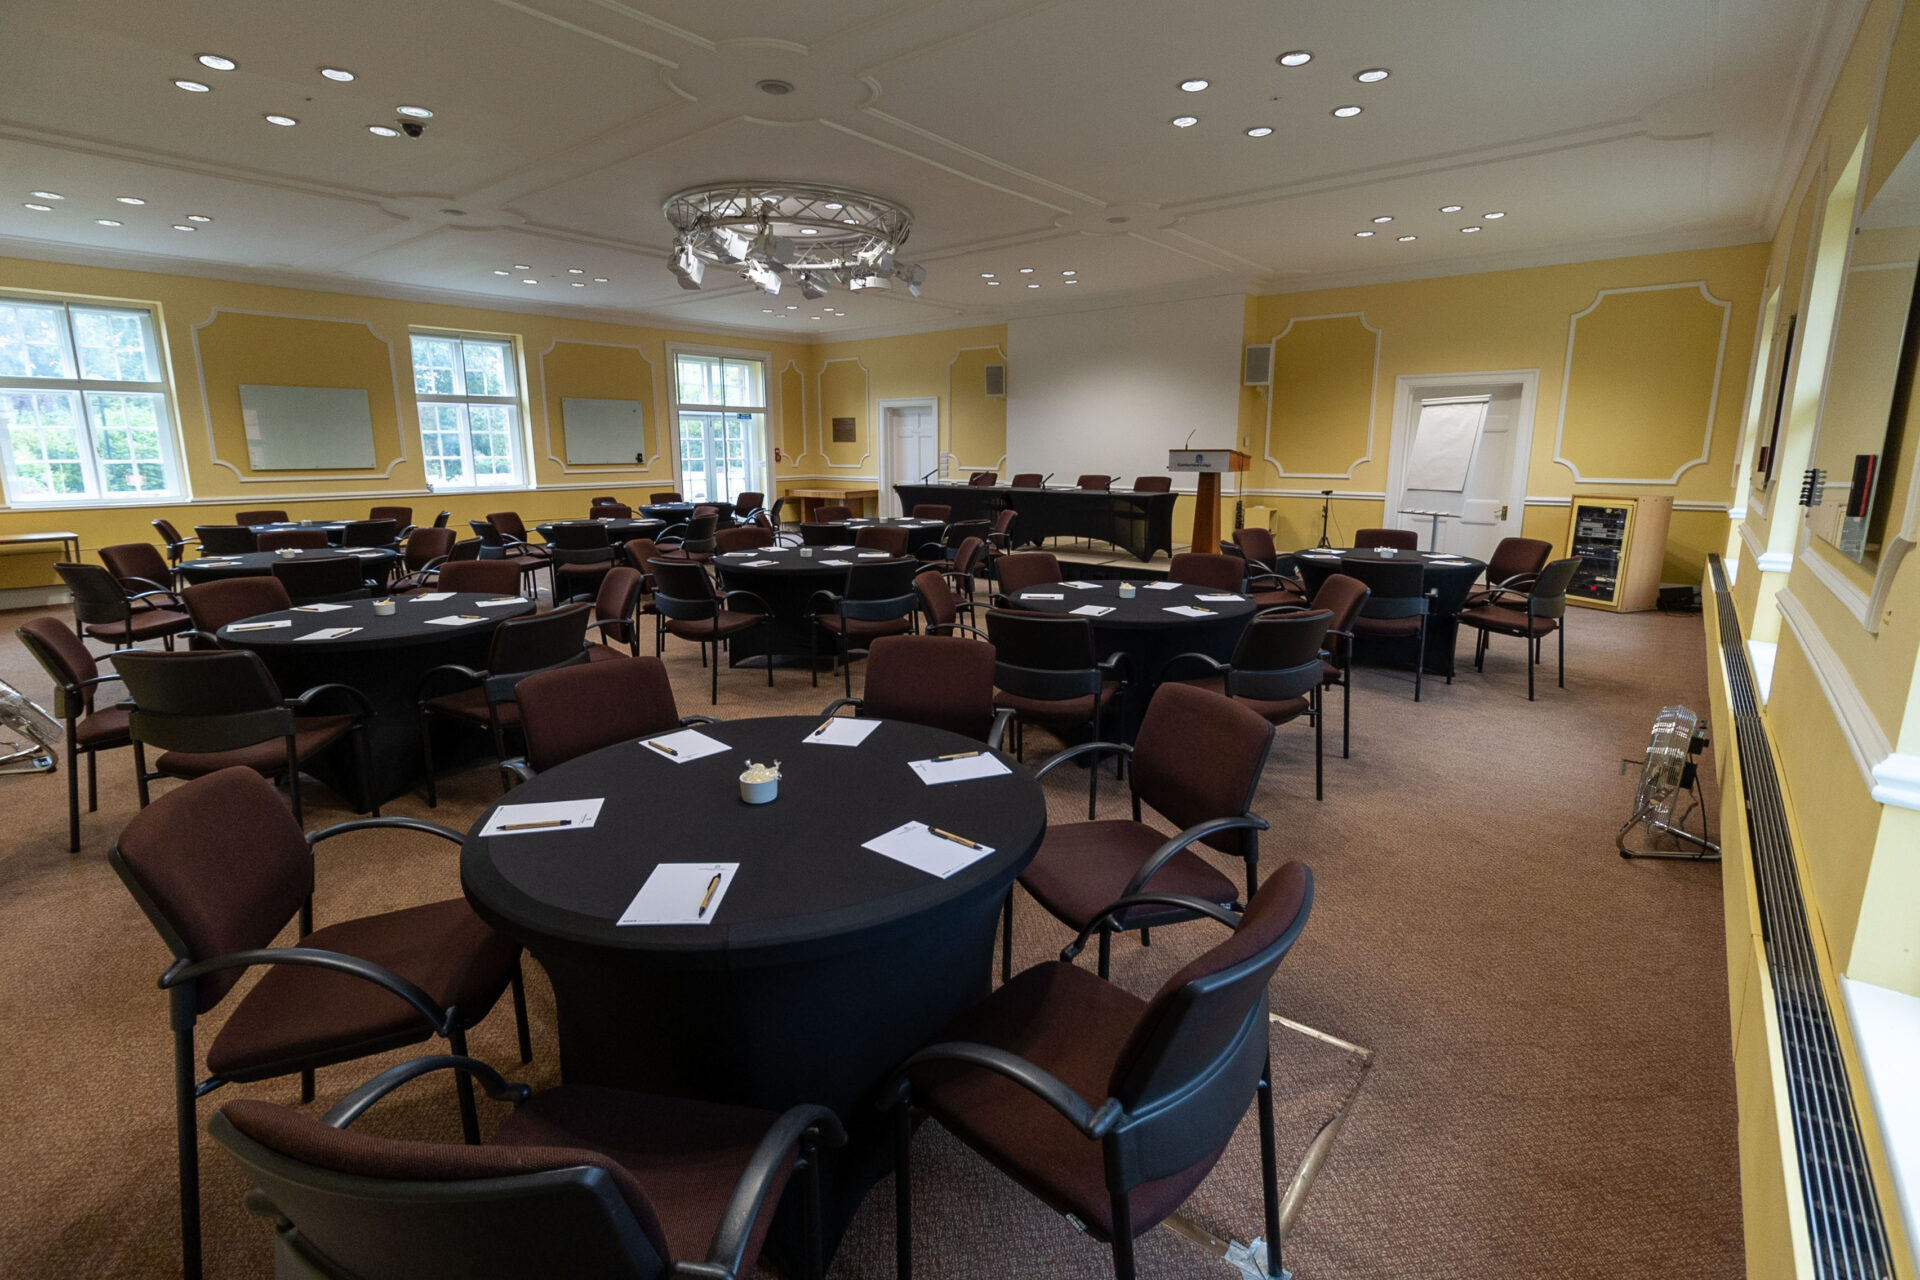 The Flitcroft conference room, set up to accommodate up to 60 people sat around circular tables.